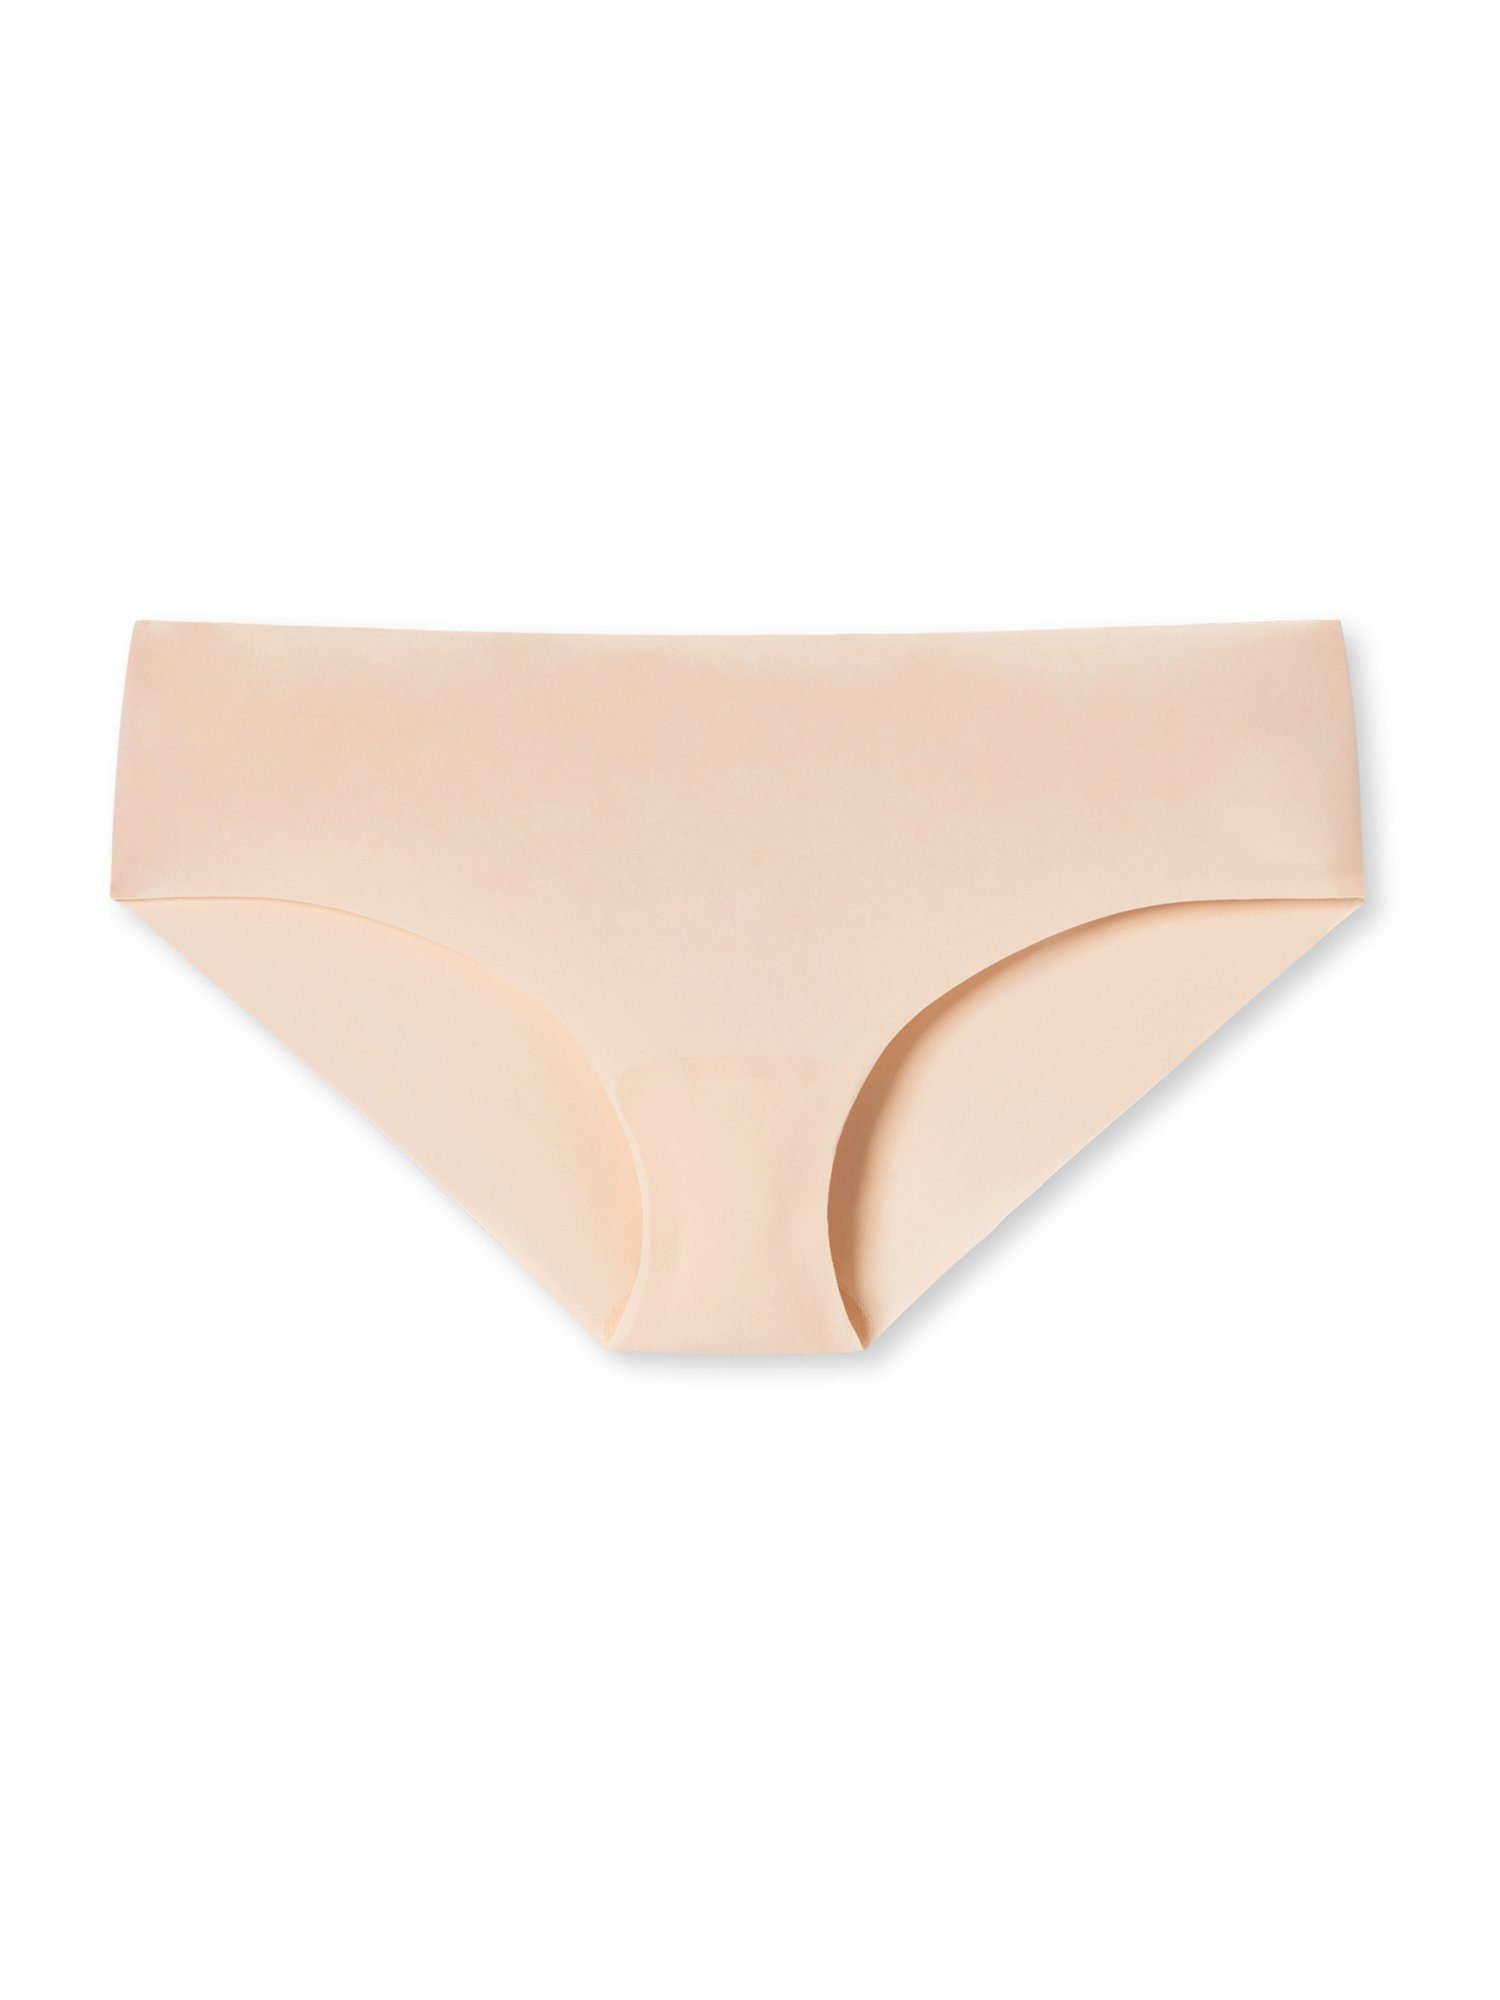 Schiesser Panty sand Invisible Light